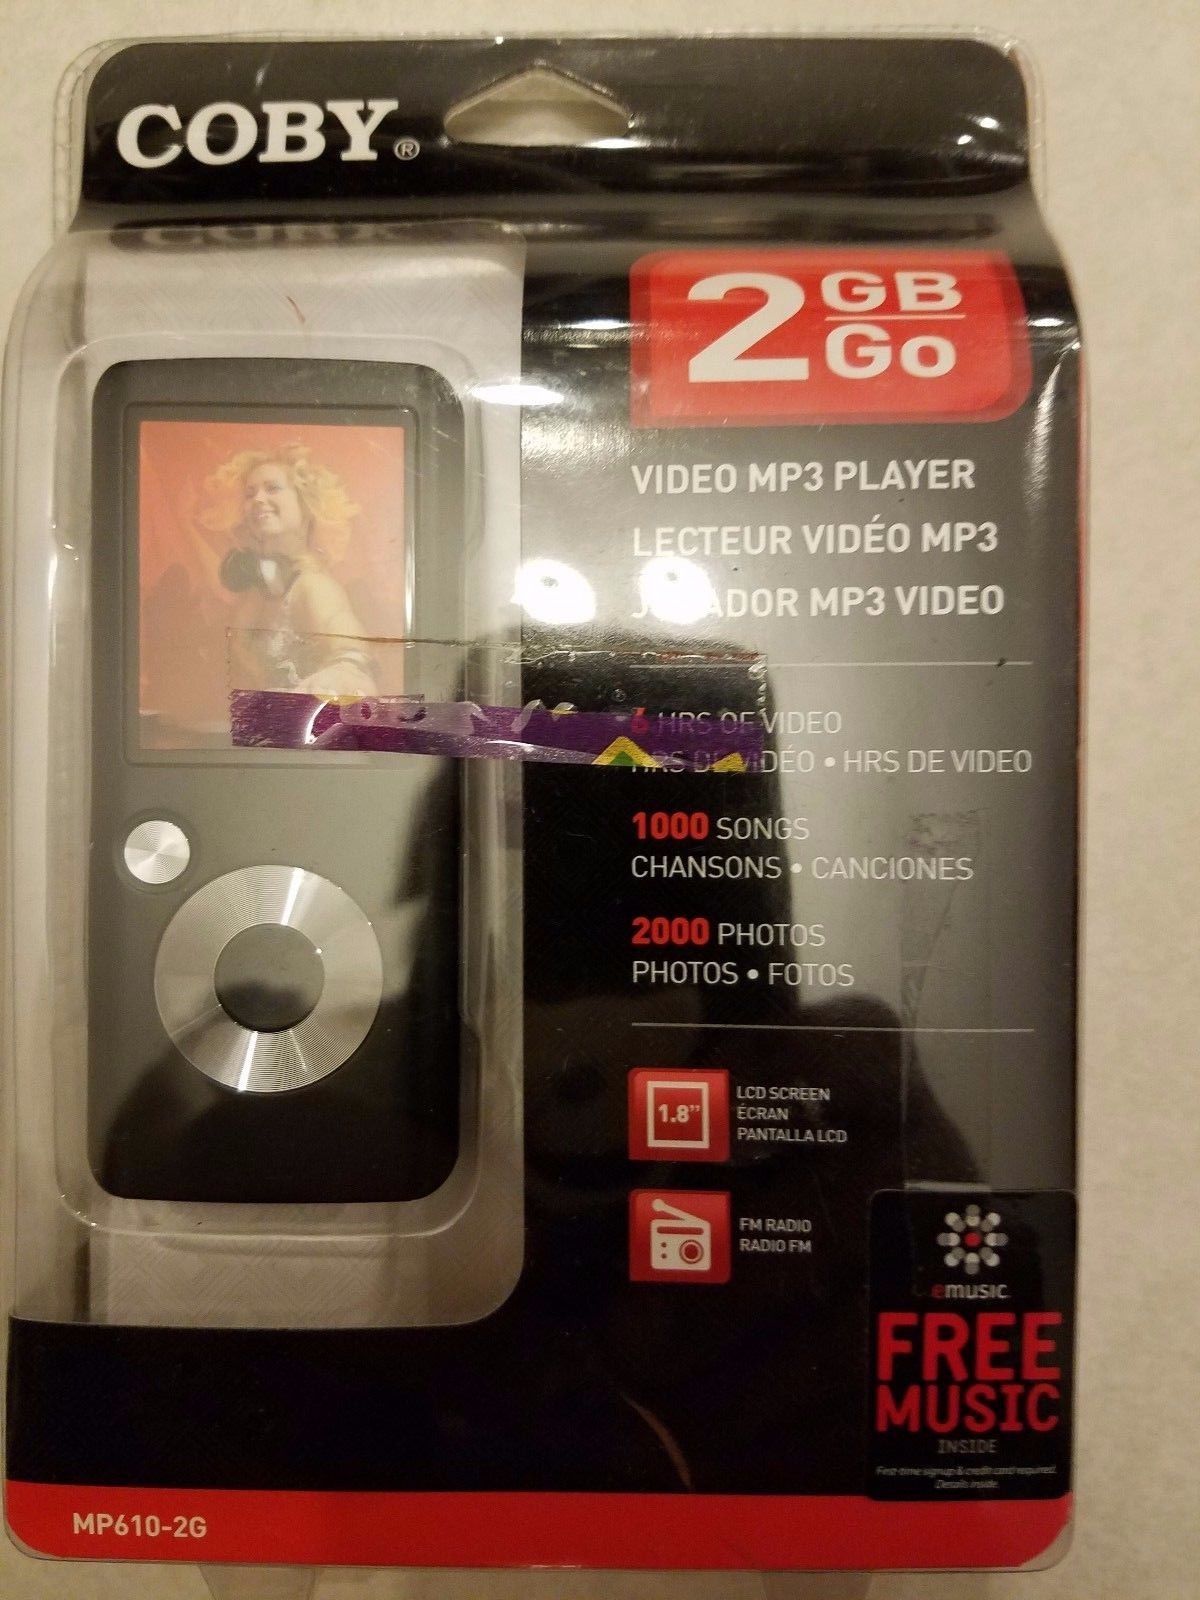 Coby 2GB Video MP3 Player MP620 2G